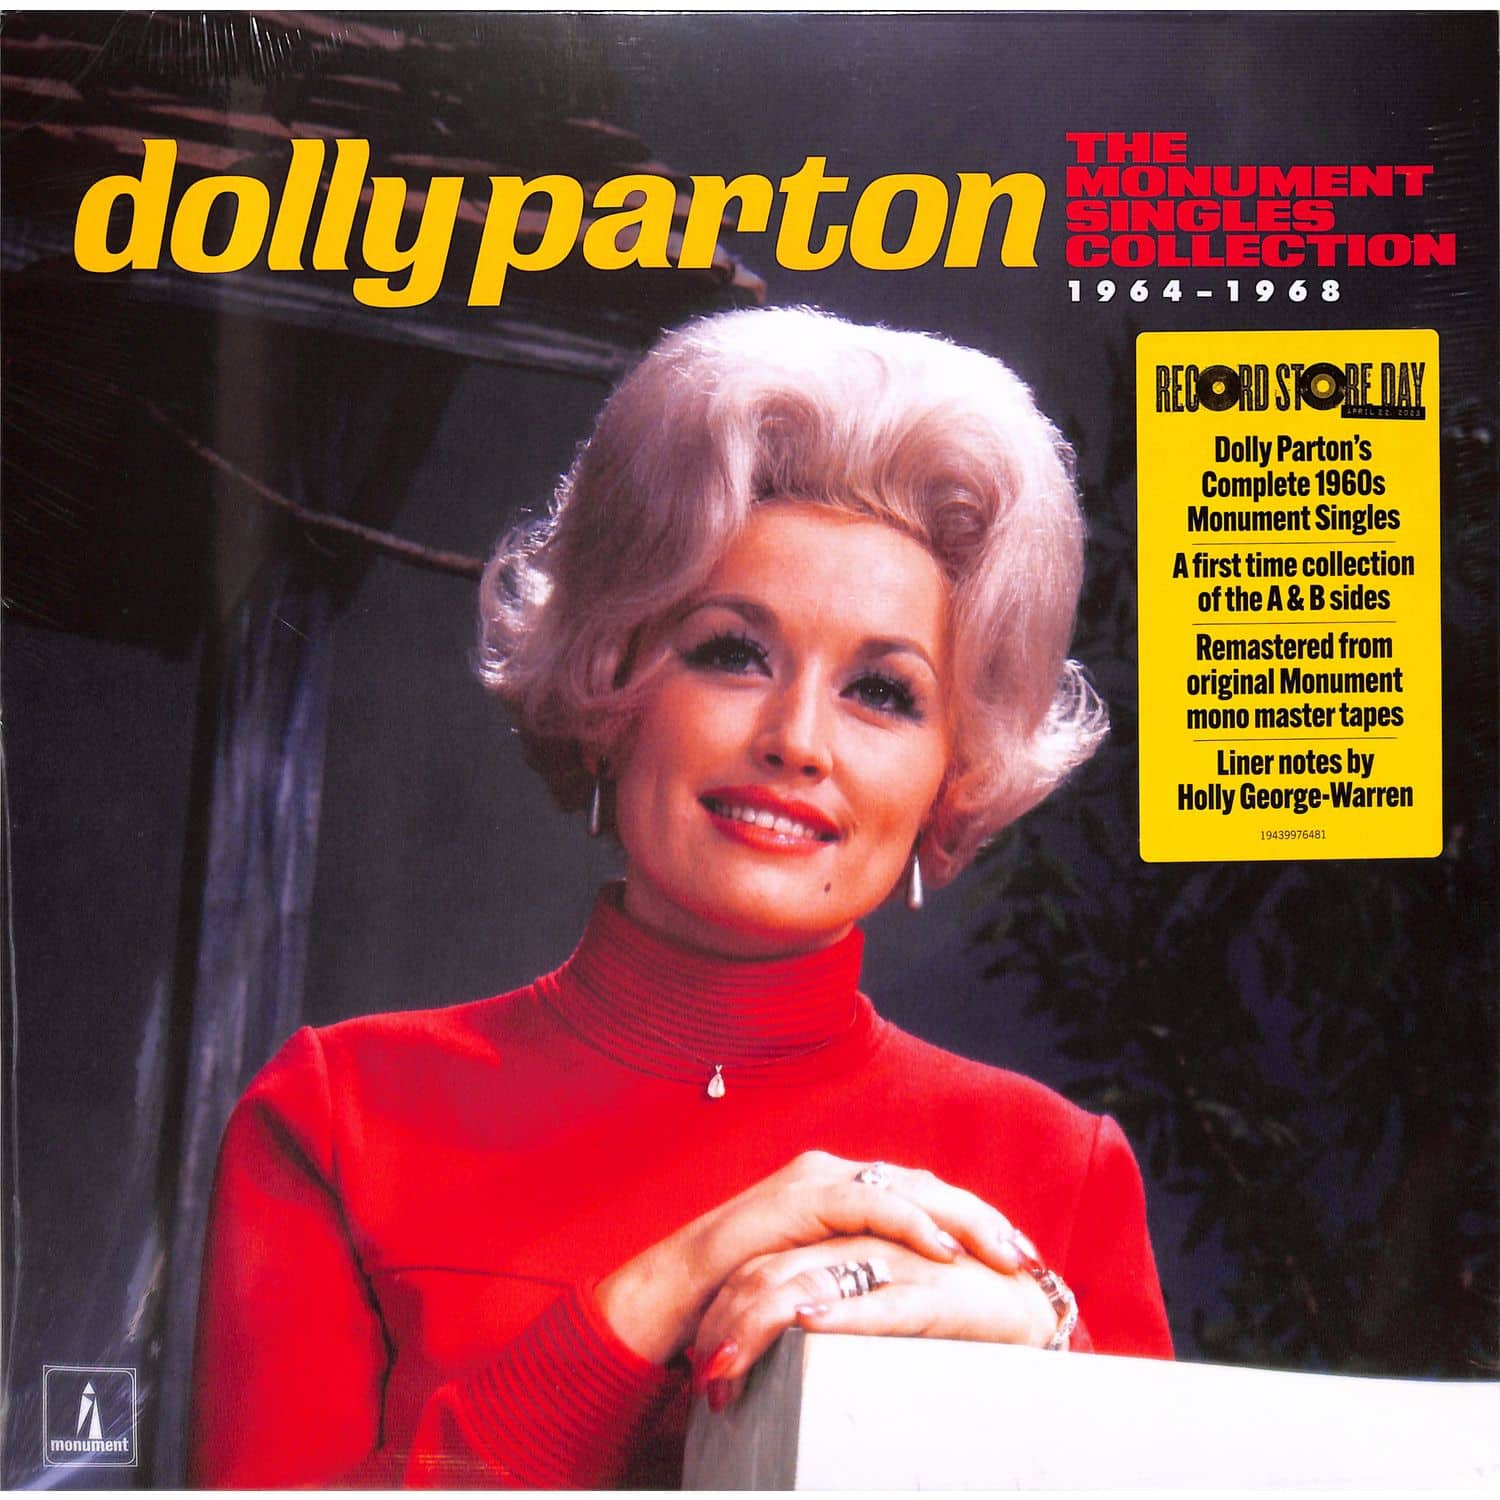 Dolly Parton - THE MONUMENT - SINGLES COLLECTION 1964-68 